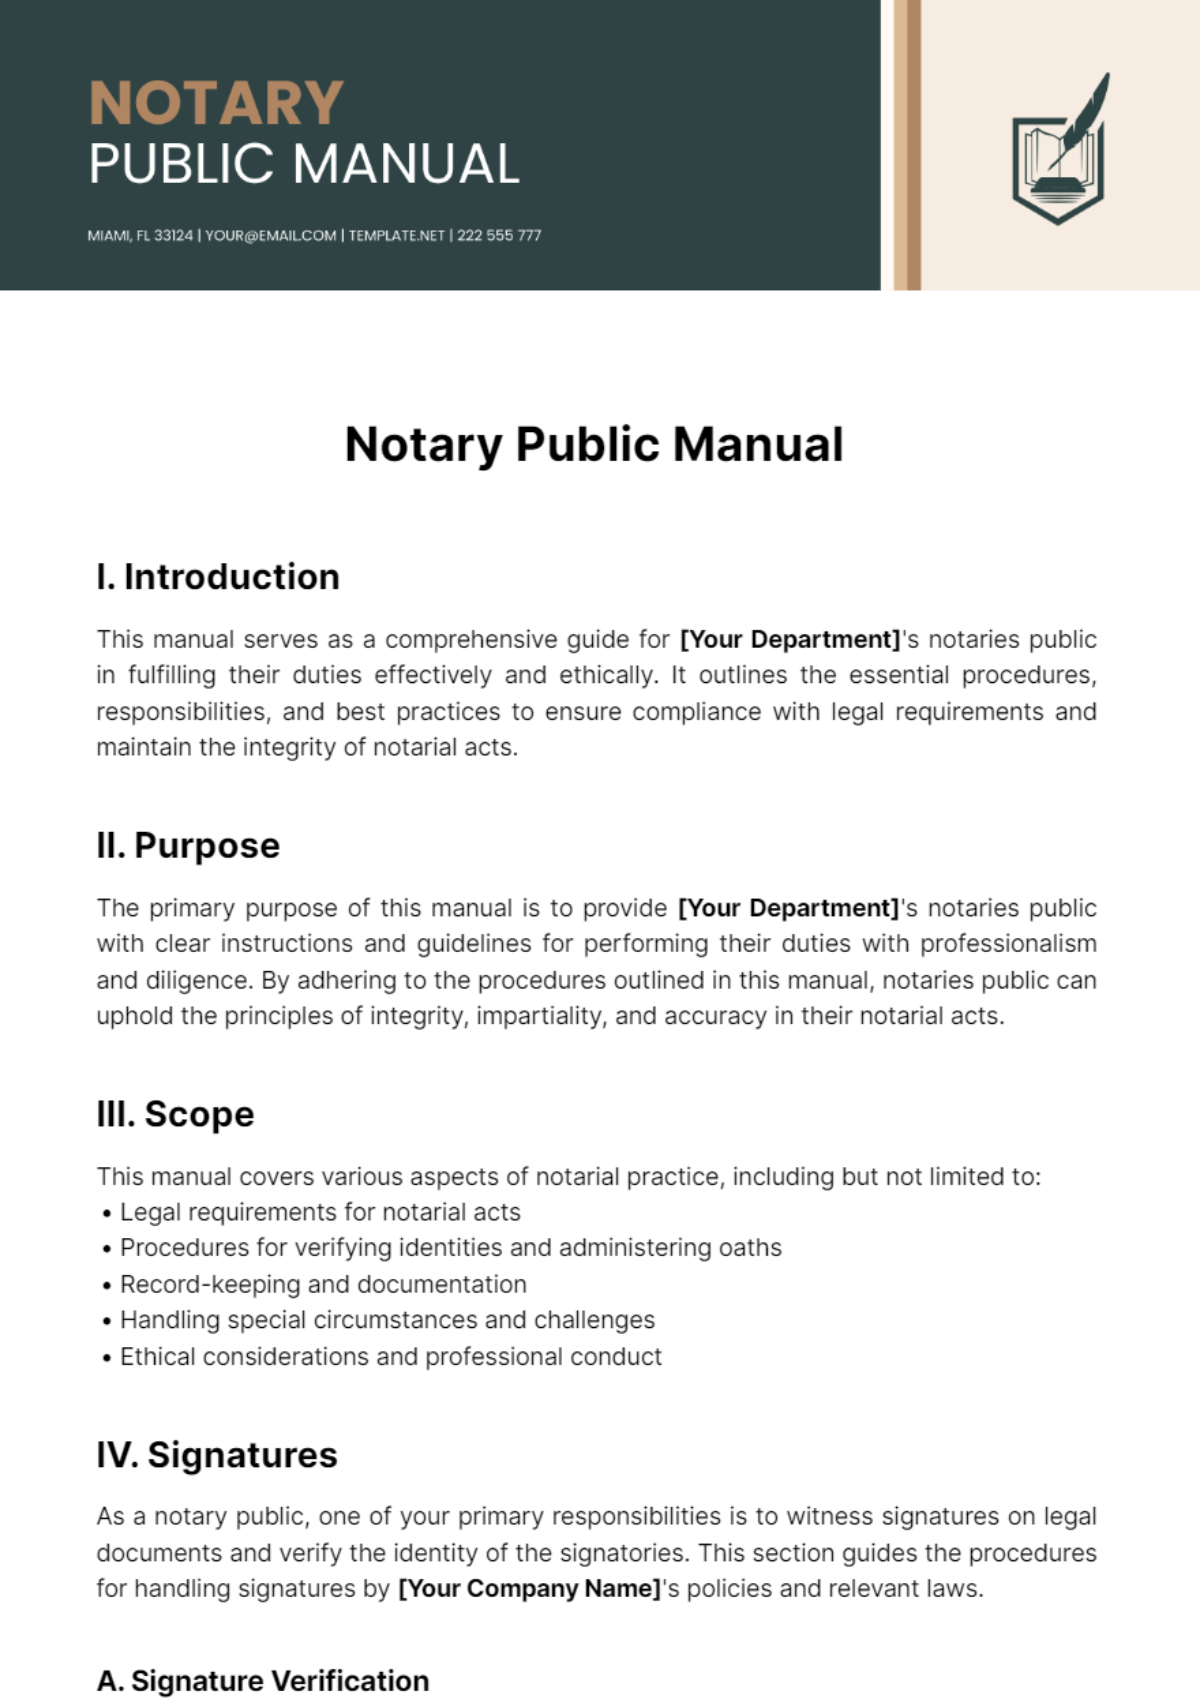 Notary Public Manual Template